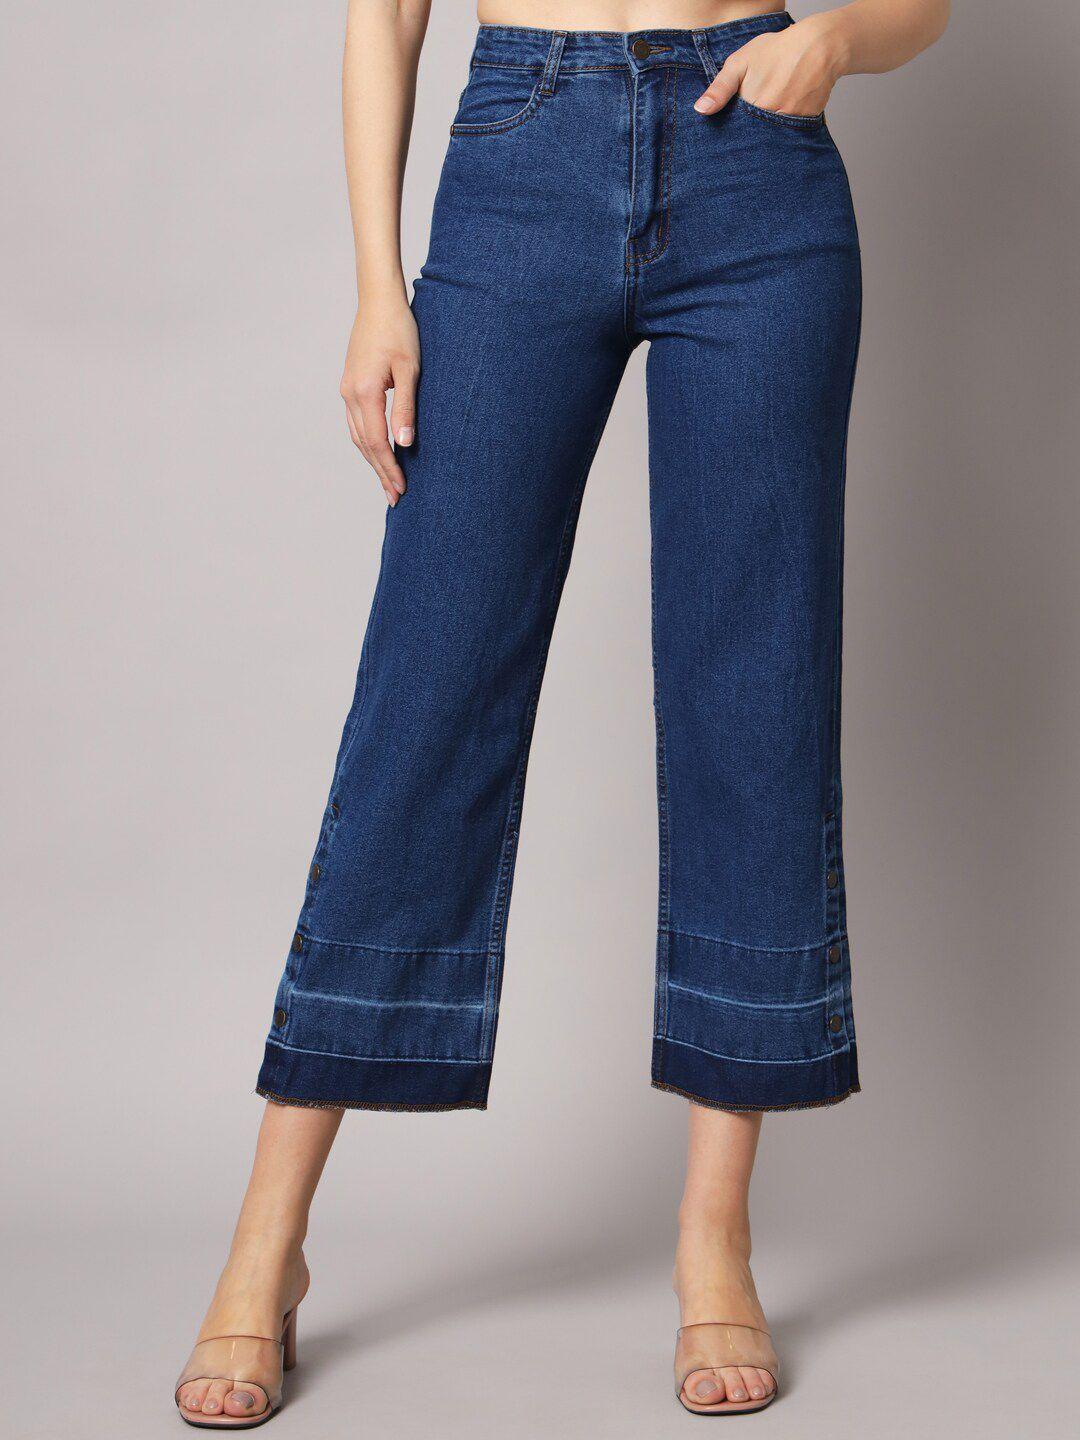 baesd-women-high-rise-light-fade-stretchable-jeans